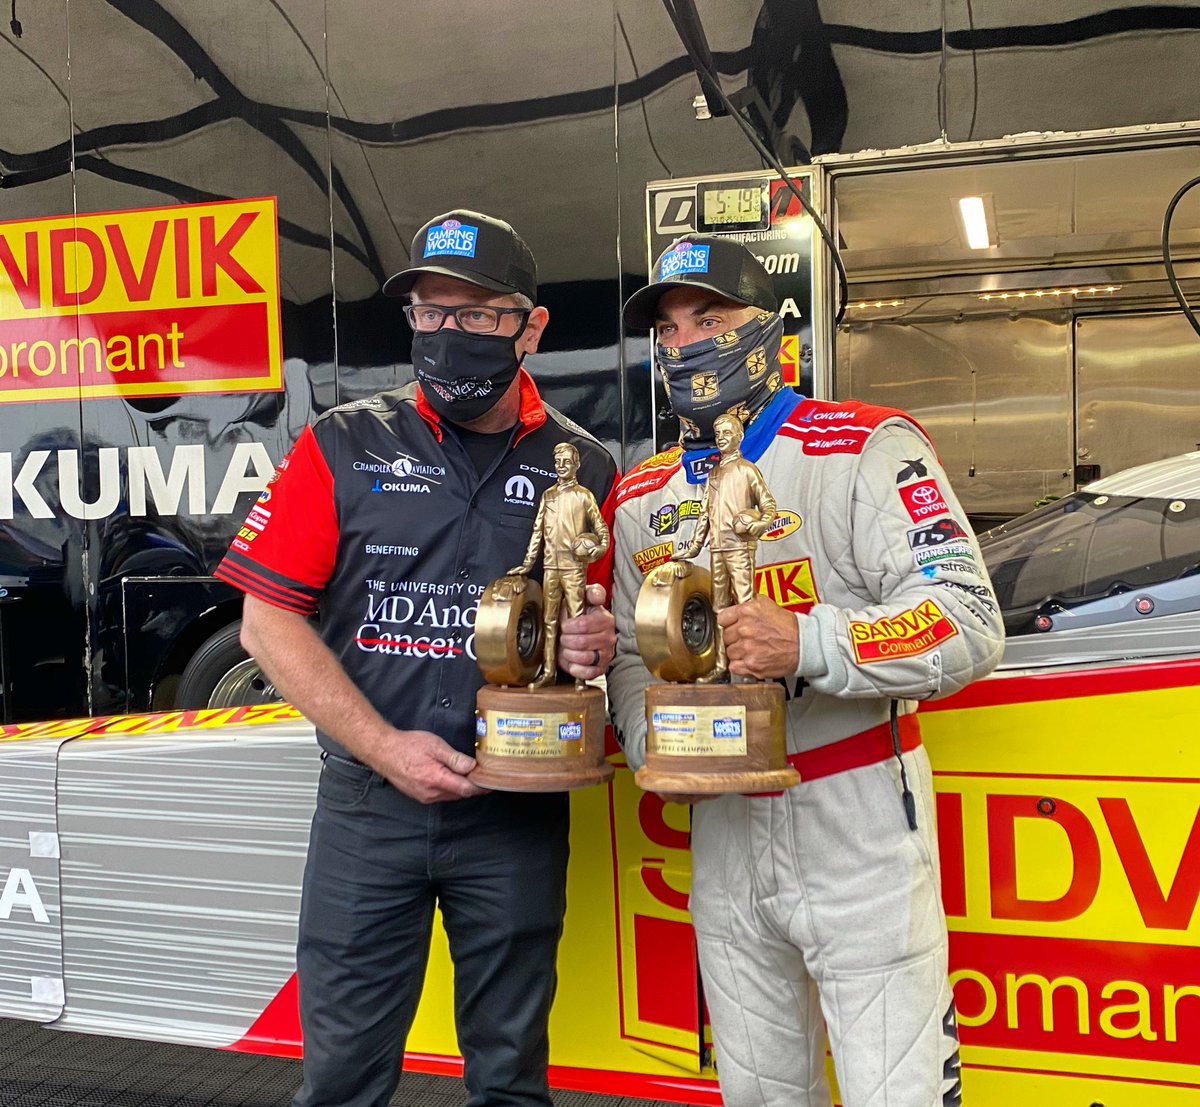 It’s a double-up with @TommyJohnson_Jr and @TheSargeTF in Houston, with DSMPM parts inside! 

Please join us in congratulating the two and their teams on today’s victories at @HoustonRaceway! 🏆

@OkumaAmerica • @SandvikCoro_US 
@Hangsterfers